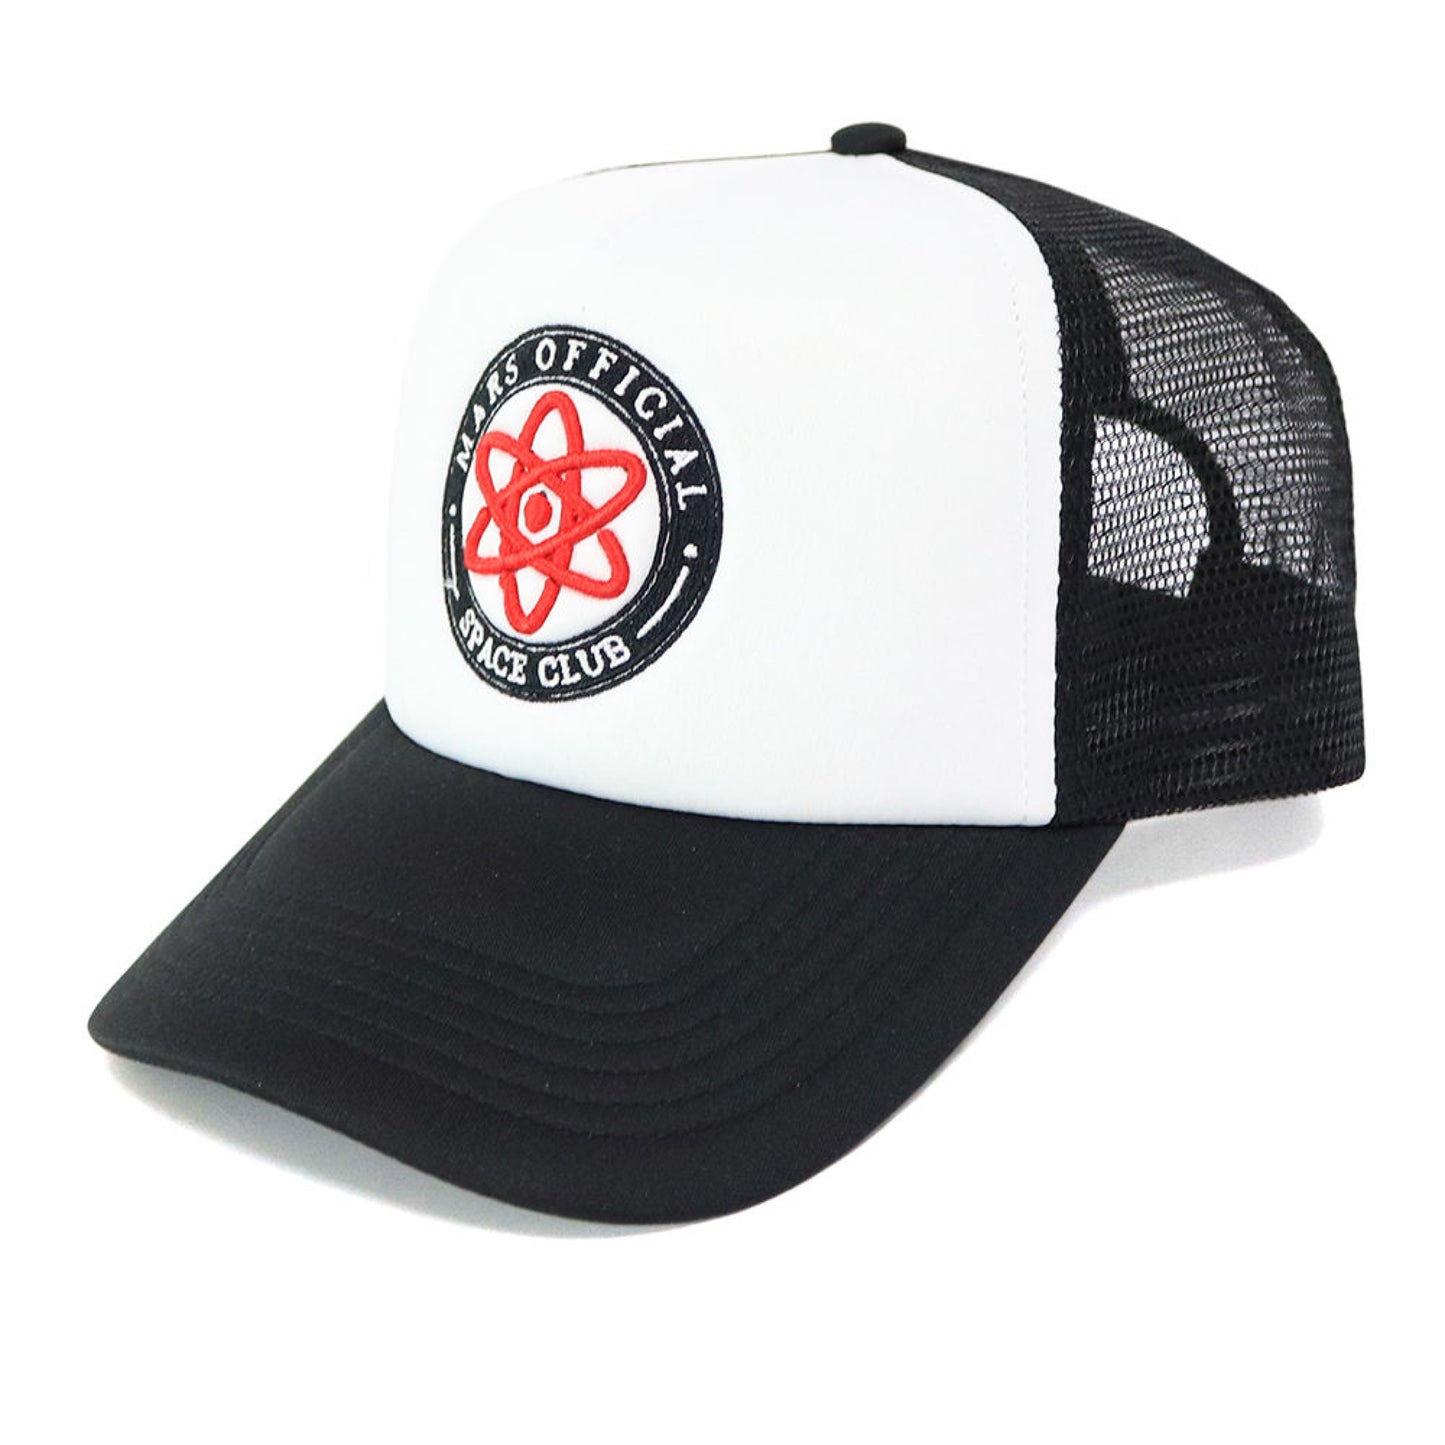 Official Space Club Trucker